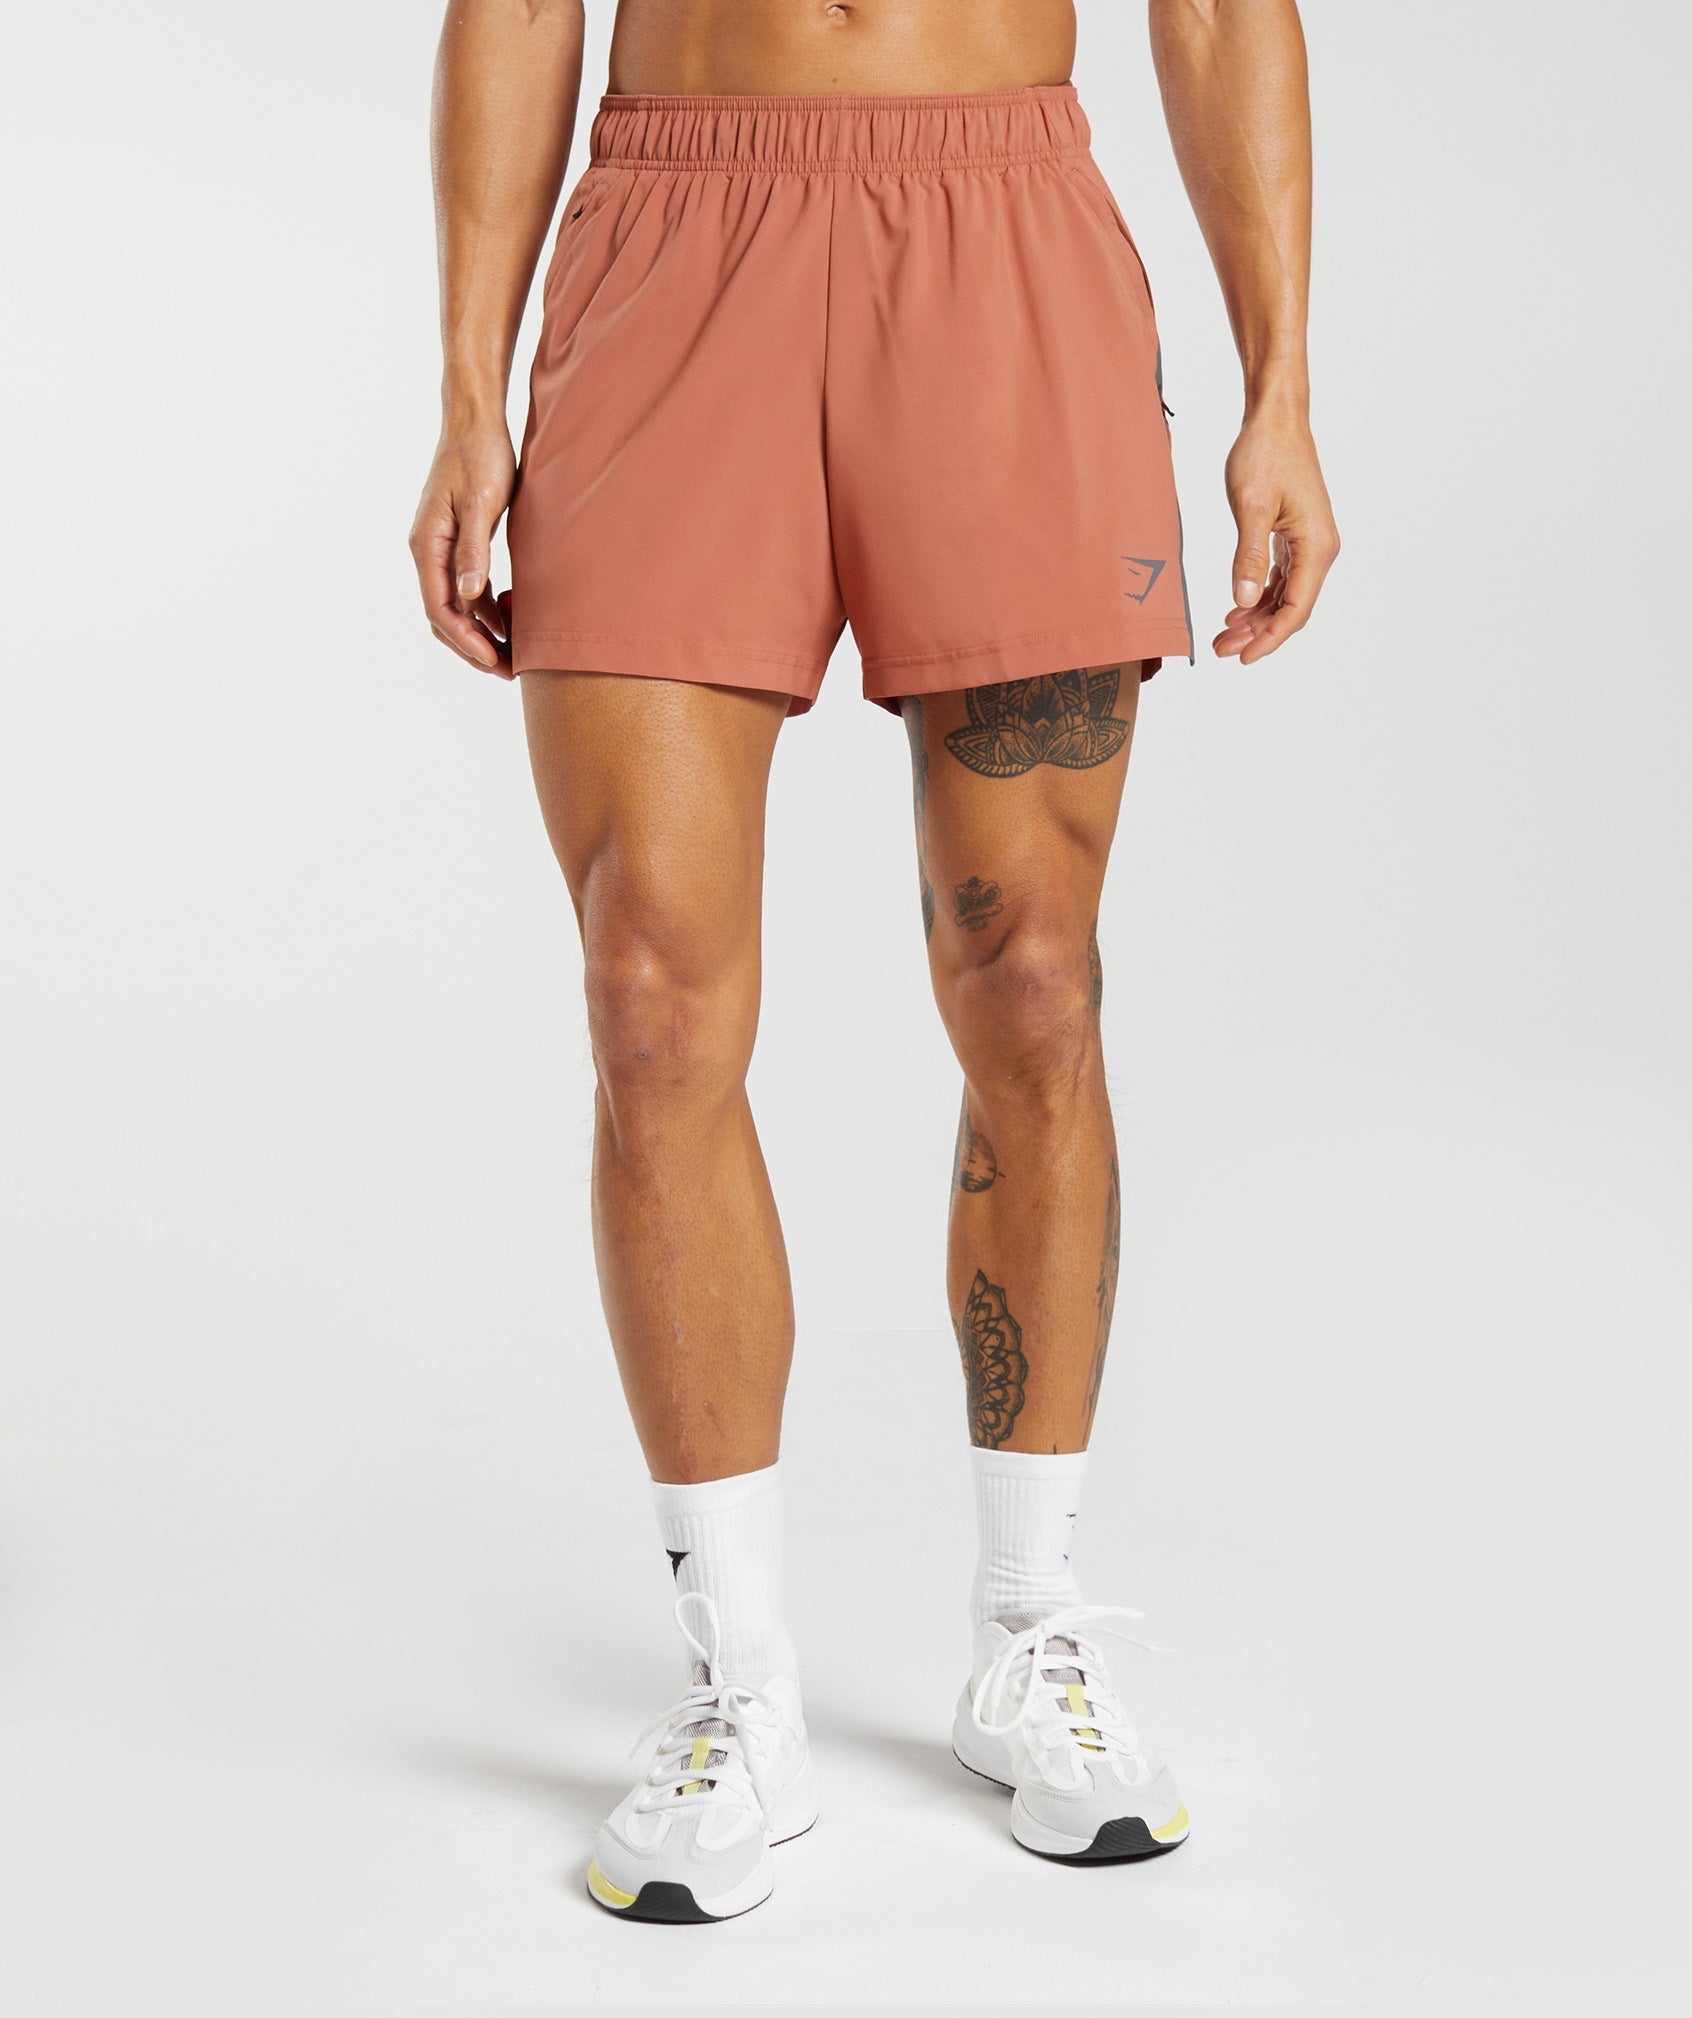 Sport 5" Shorts in Persimmon Red/Silhouette Grey - view 1